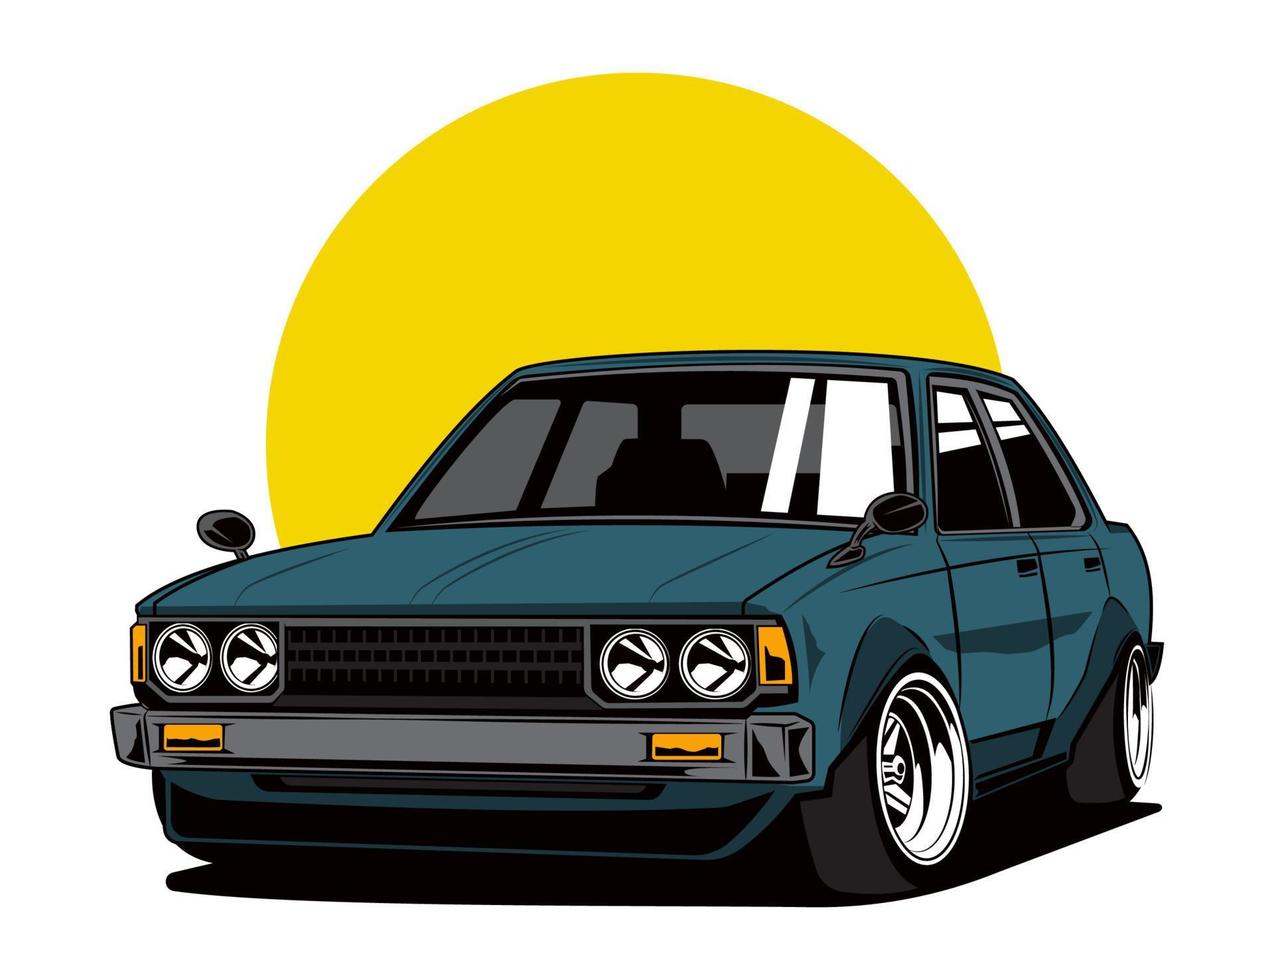 old car illustration design with dark green color in vector graphic file